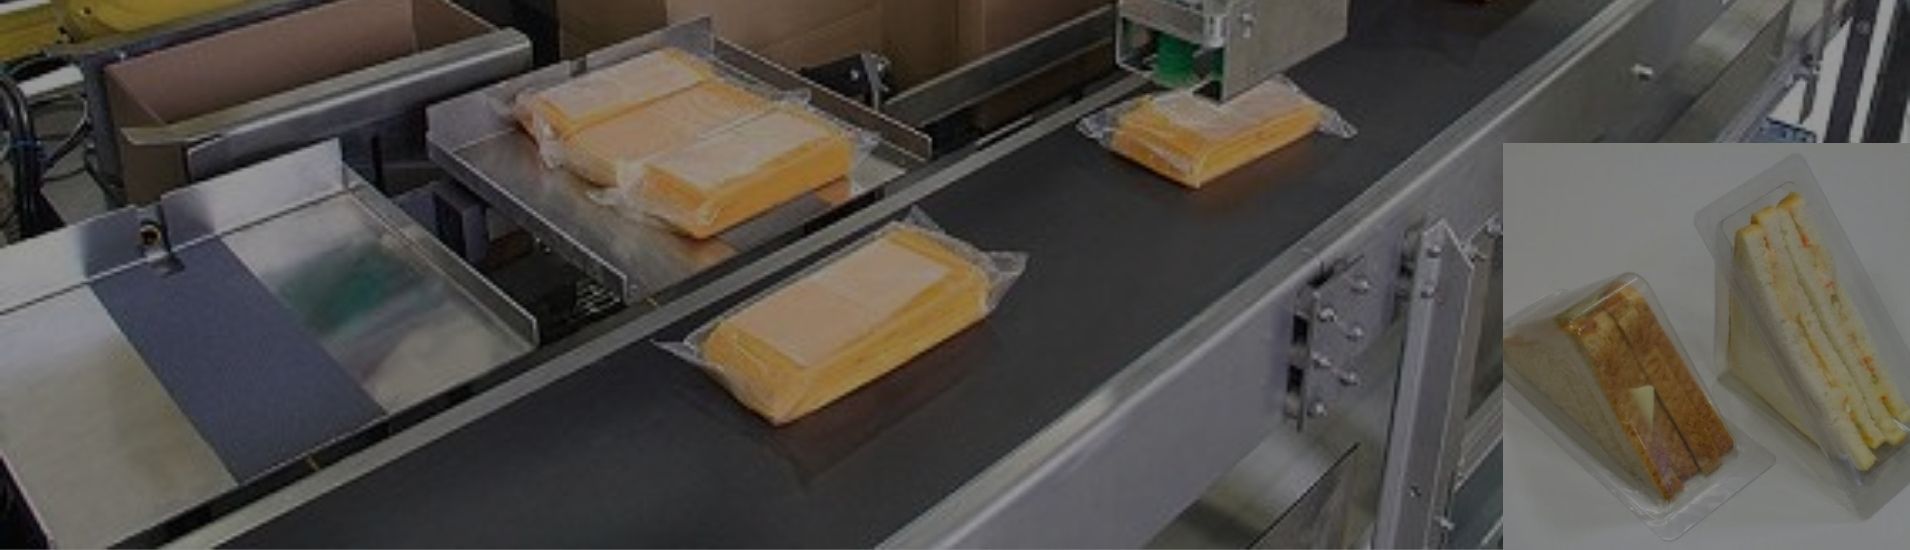 Reliable Sandwich Packaging Machine Supplier in China